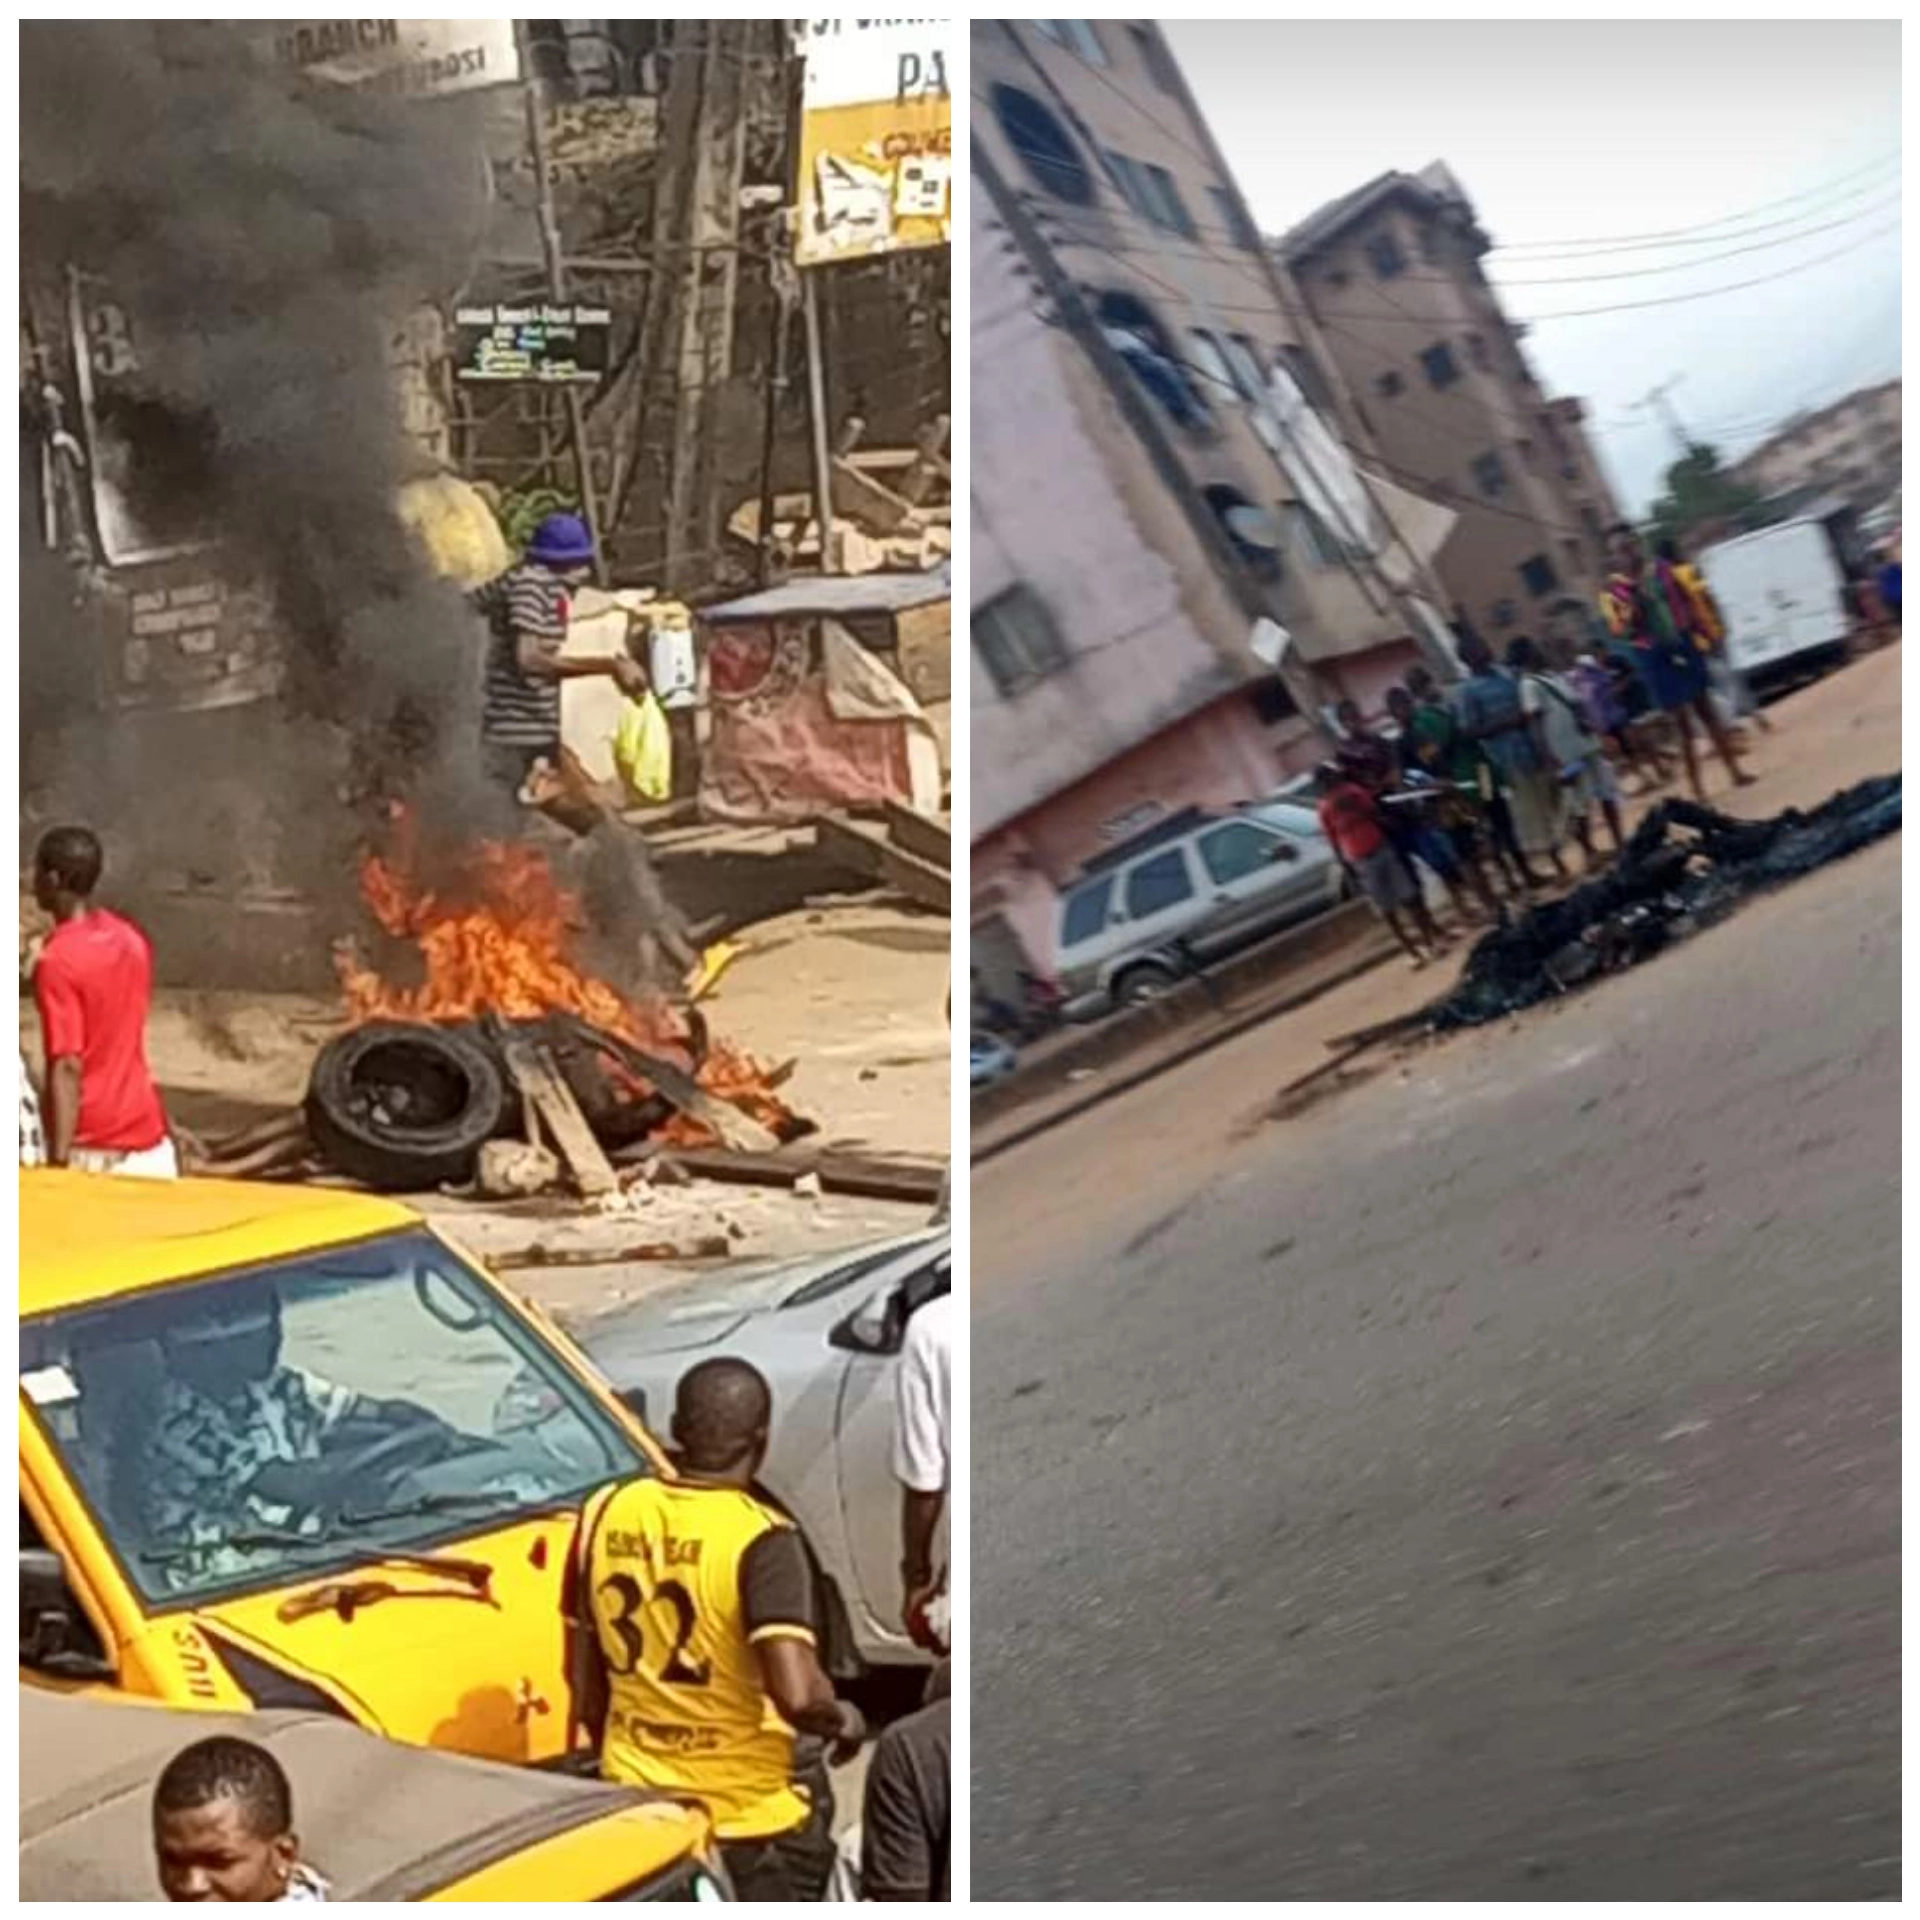 Five Men Burnt To Death For Alleged Trying To Steal Tricycle in Onitsha, Anambra State (Photos), Five Men Burnt To Death For Alleged Trying To Steal Tricycle in Onitsha, Anambra State (Photos), INFINITY LOADED